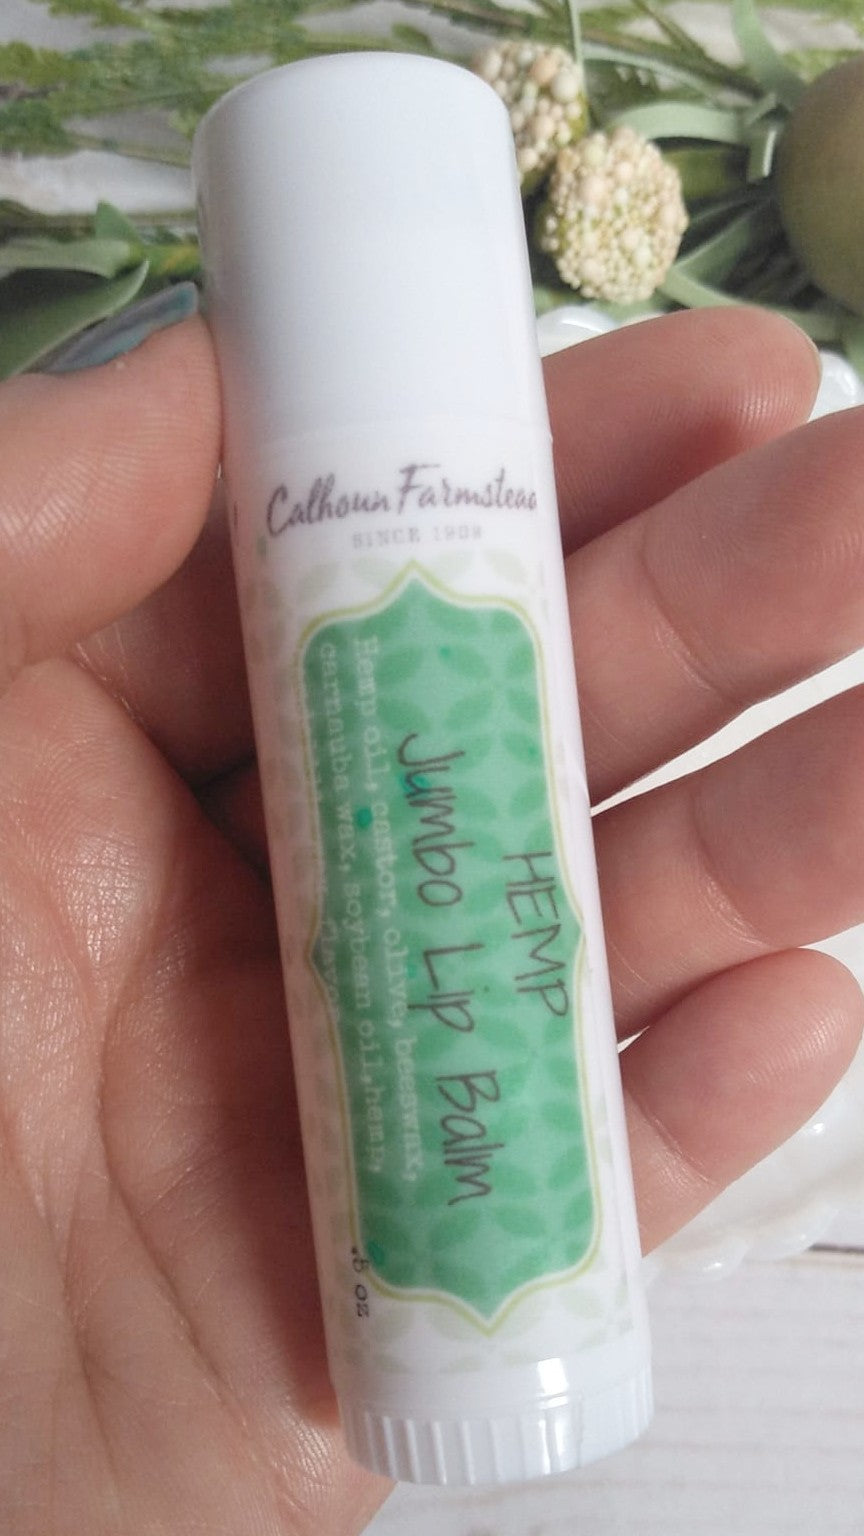 hemp lip balm made with natural ingredients for sensitive skin.